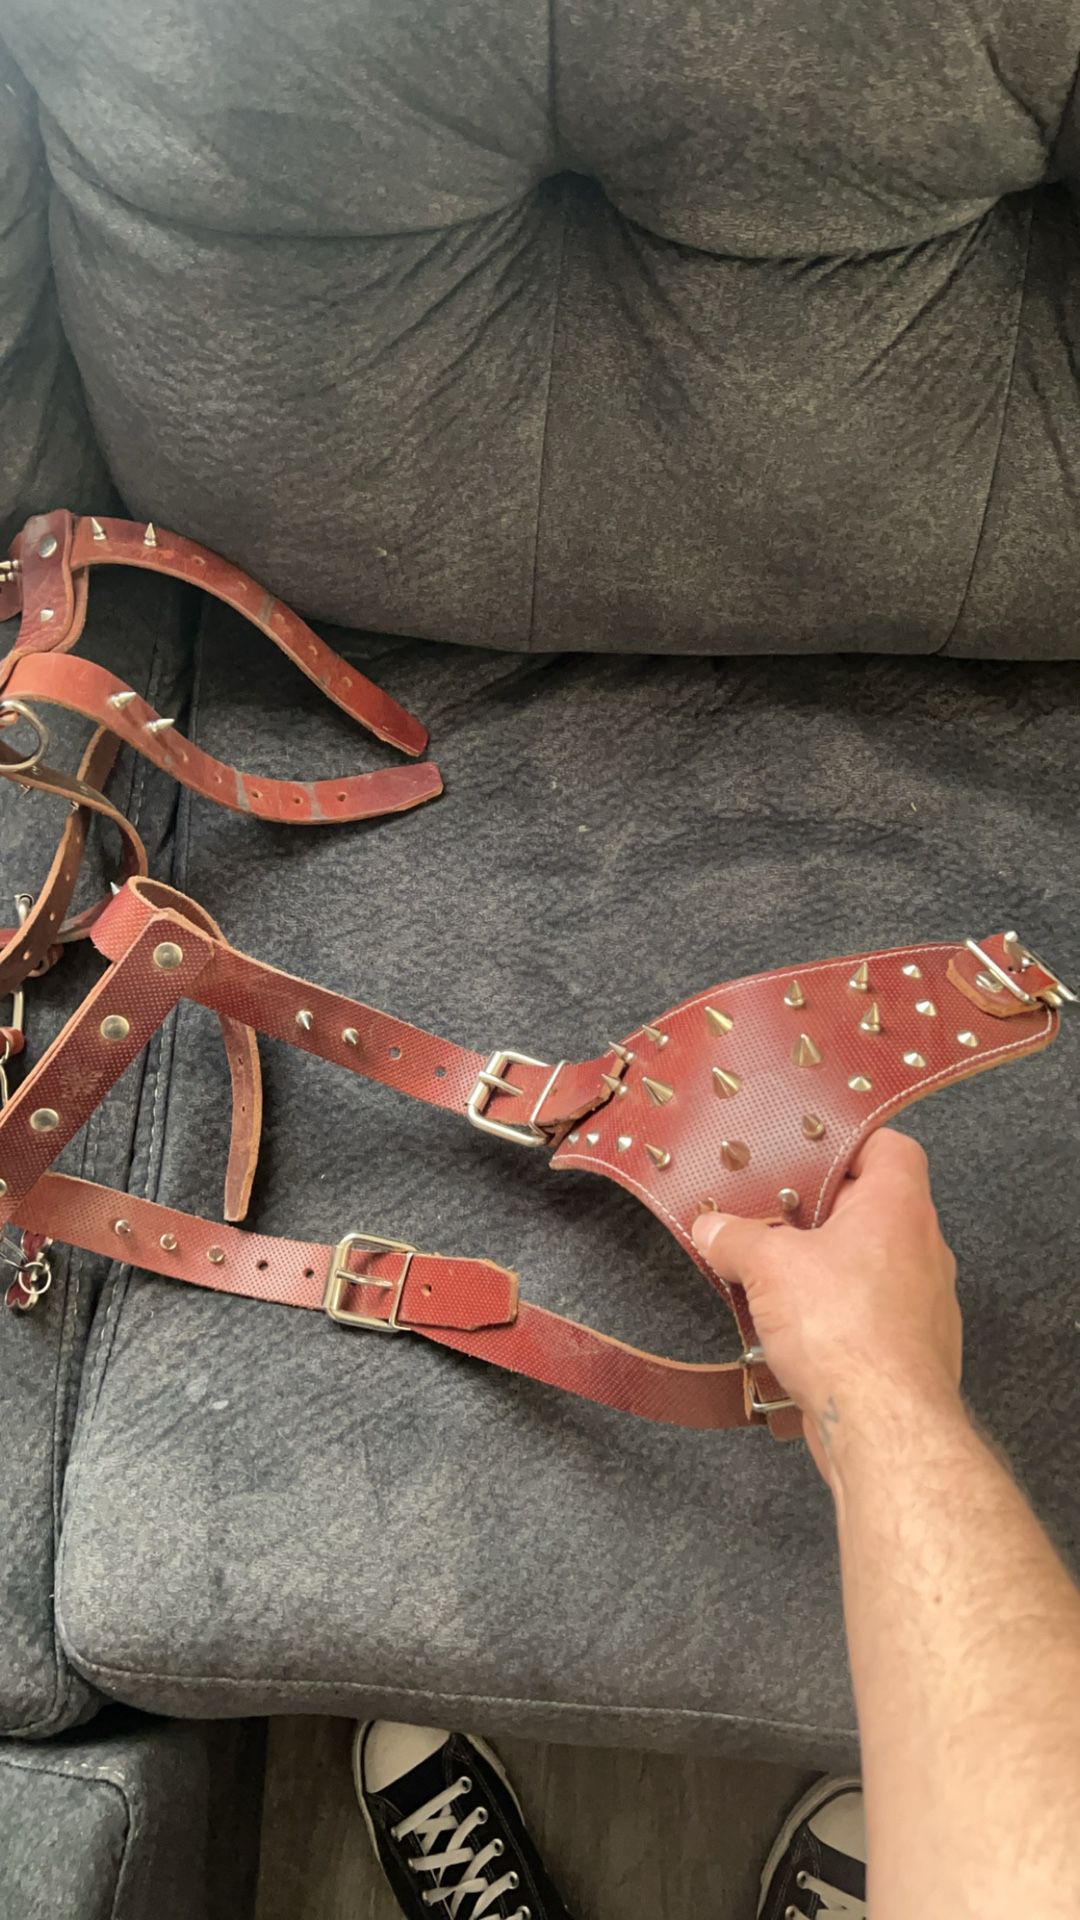 SPIKED LEATHER DOG HARNESS 